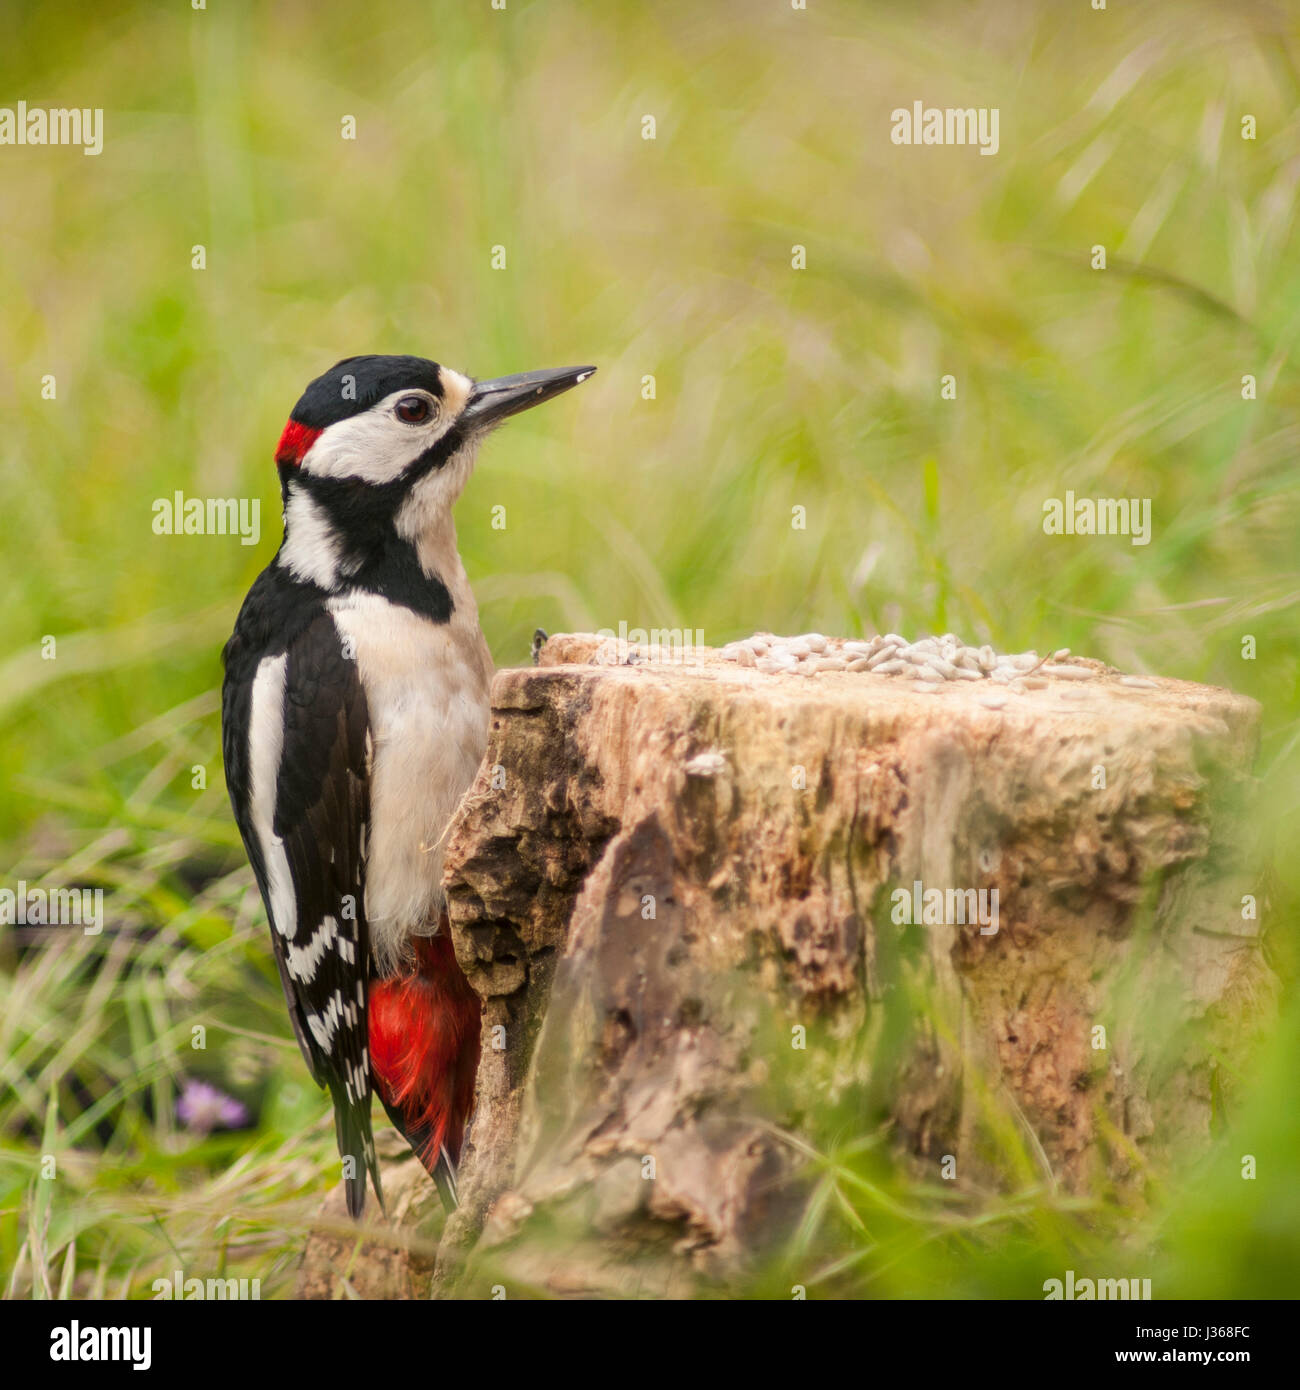 A Great Spotted Woodpecker (Dendrocopos major) on a log in the uk Stock Photo